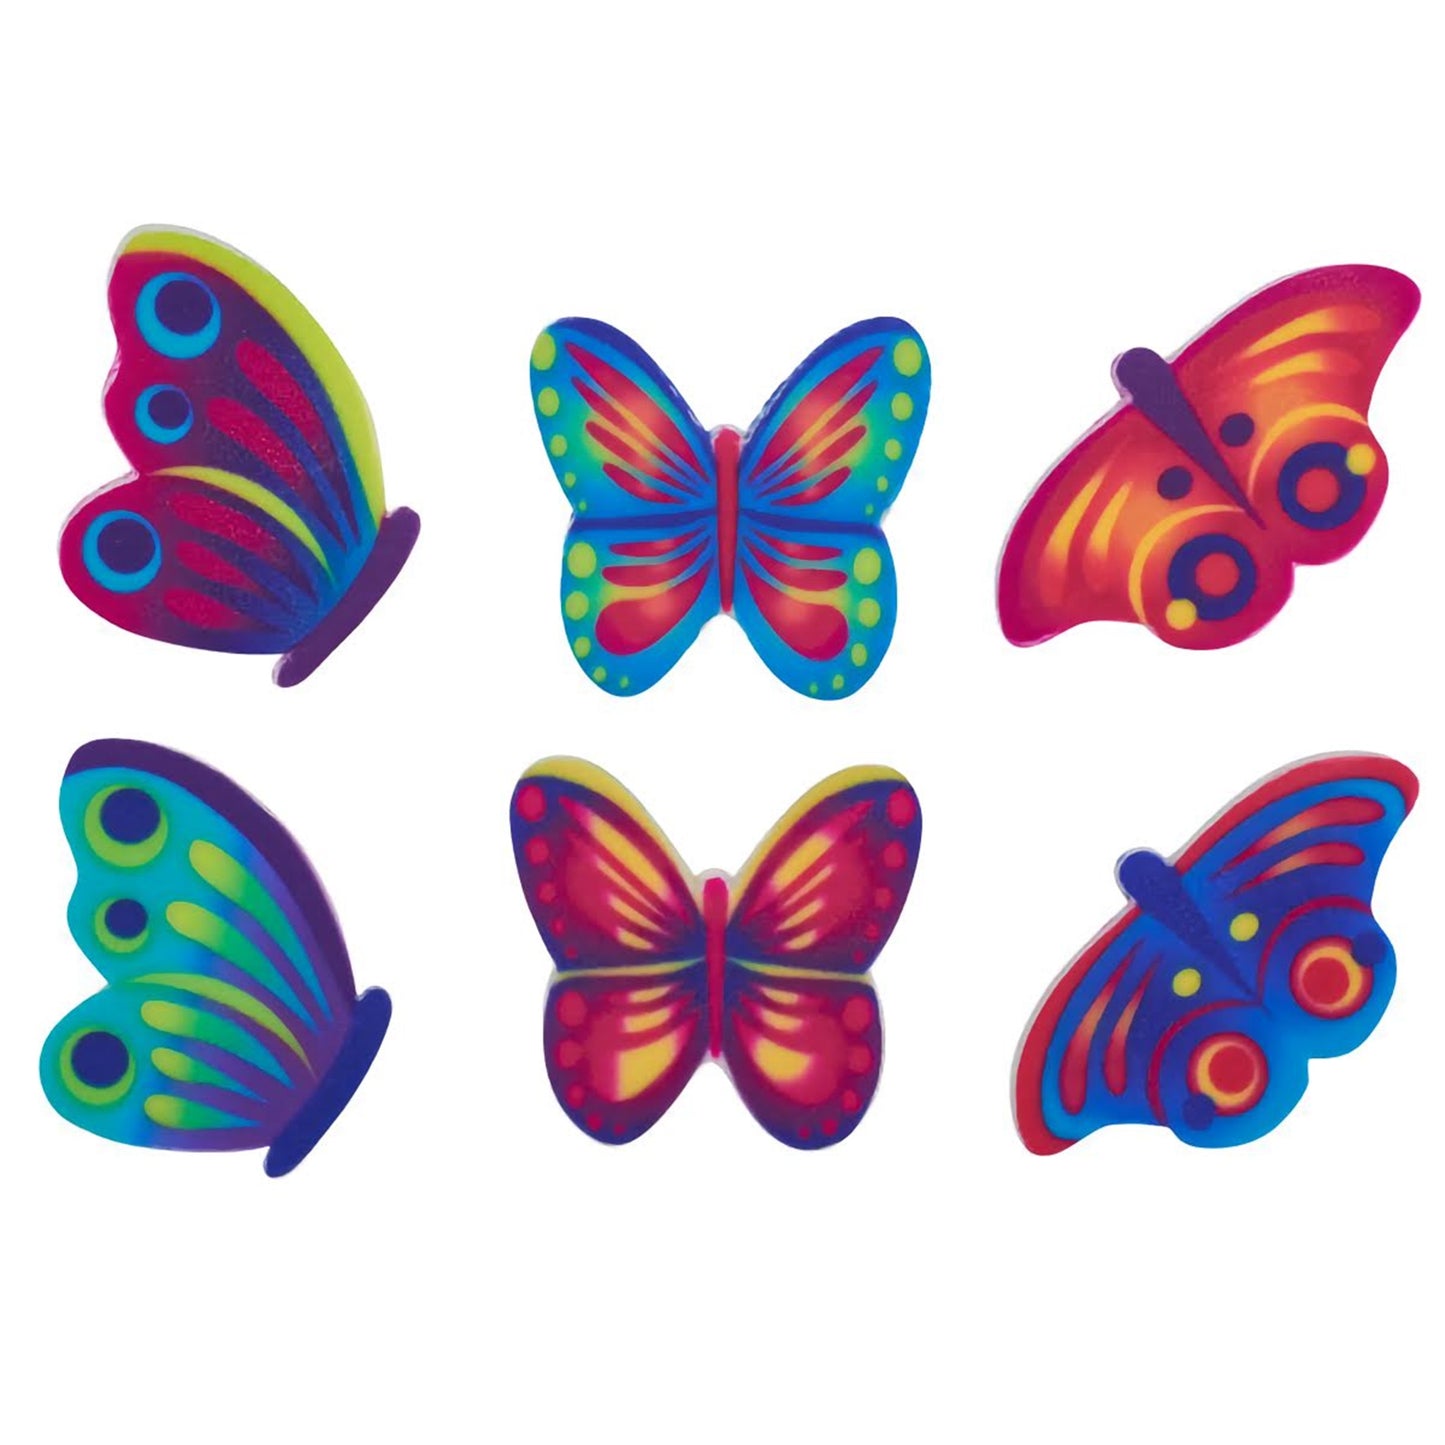 A vibrant collection of six butterfly-shaped edible decorations in bold, bright colors. Each butterfly features intricate wing patterns with dots and stripes, making them a playful and eye-catching choice for decorating confections aimed at a fun and festive occasion.